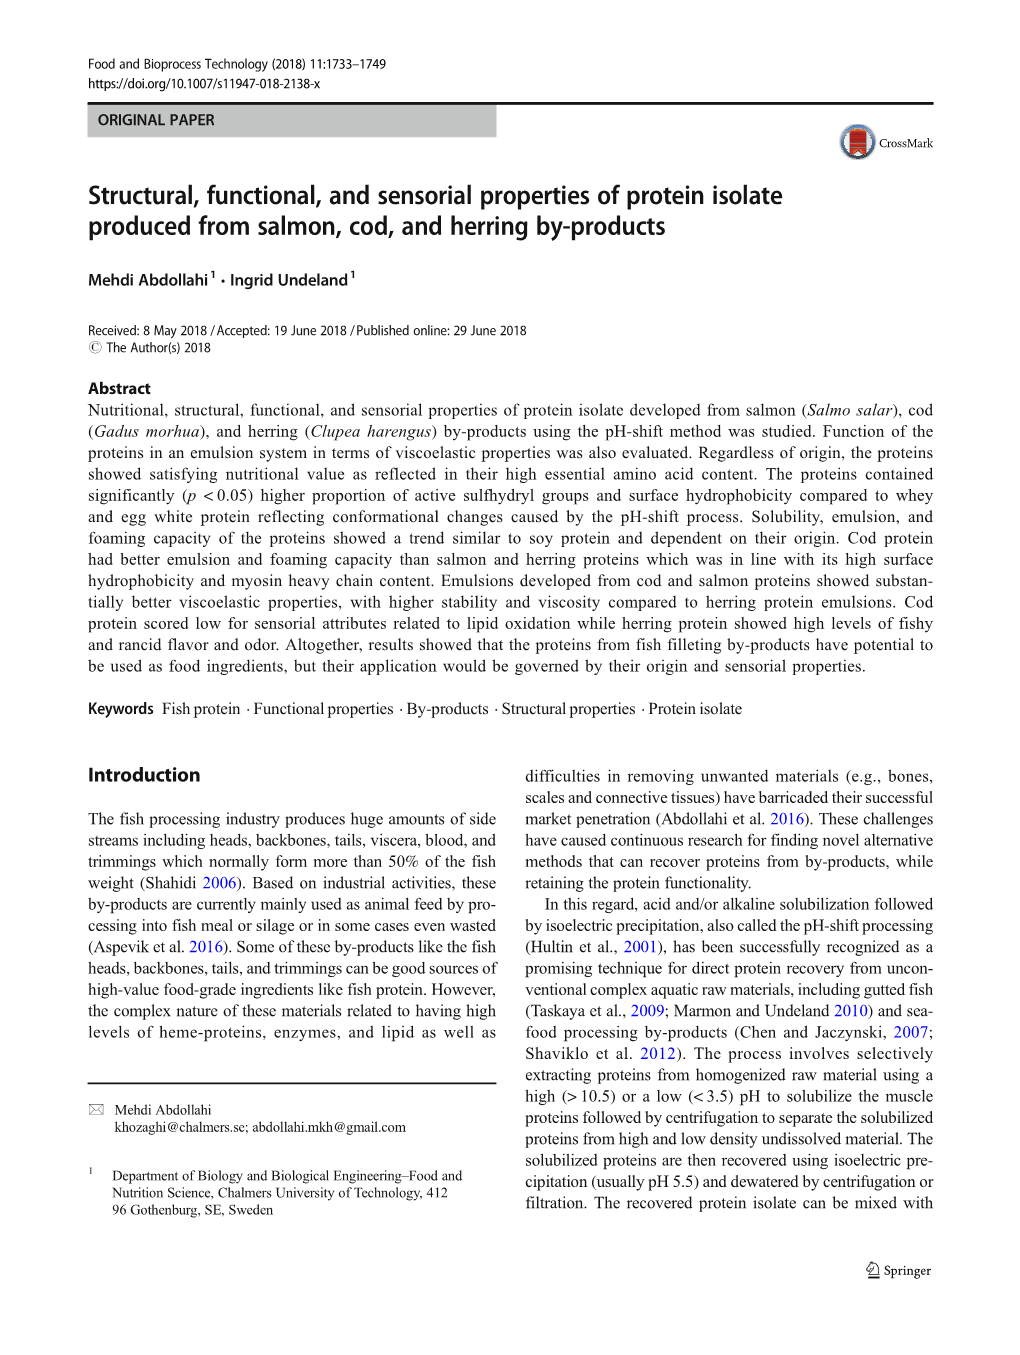 Structural, Functional, and Sensorial Properties of Protein Isolate Produced from Salmon, Cod, and Herring By-Products